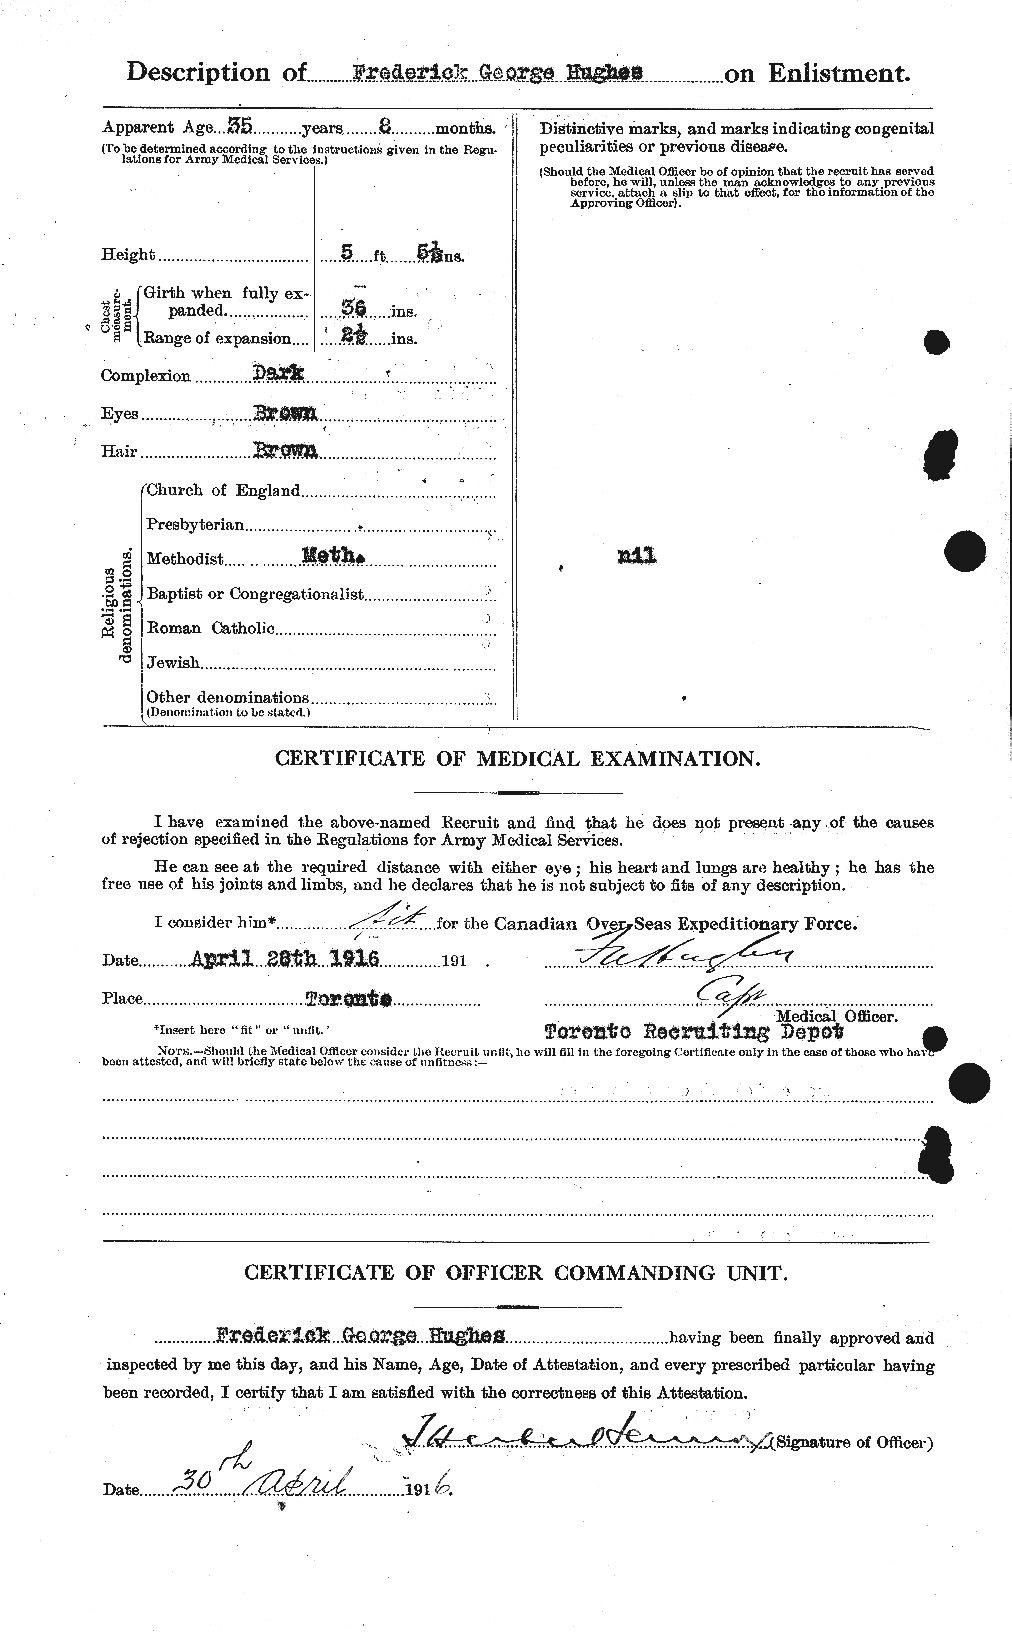 Personnel Records of the First World War - CEF 403799b